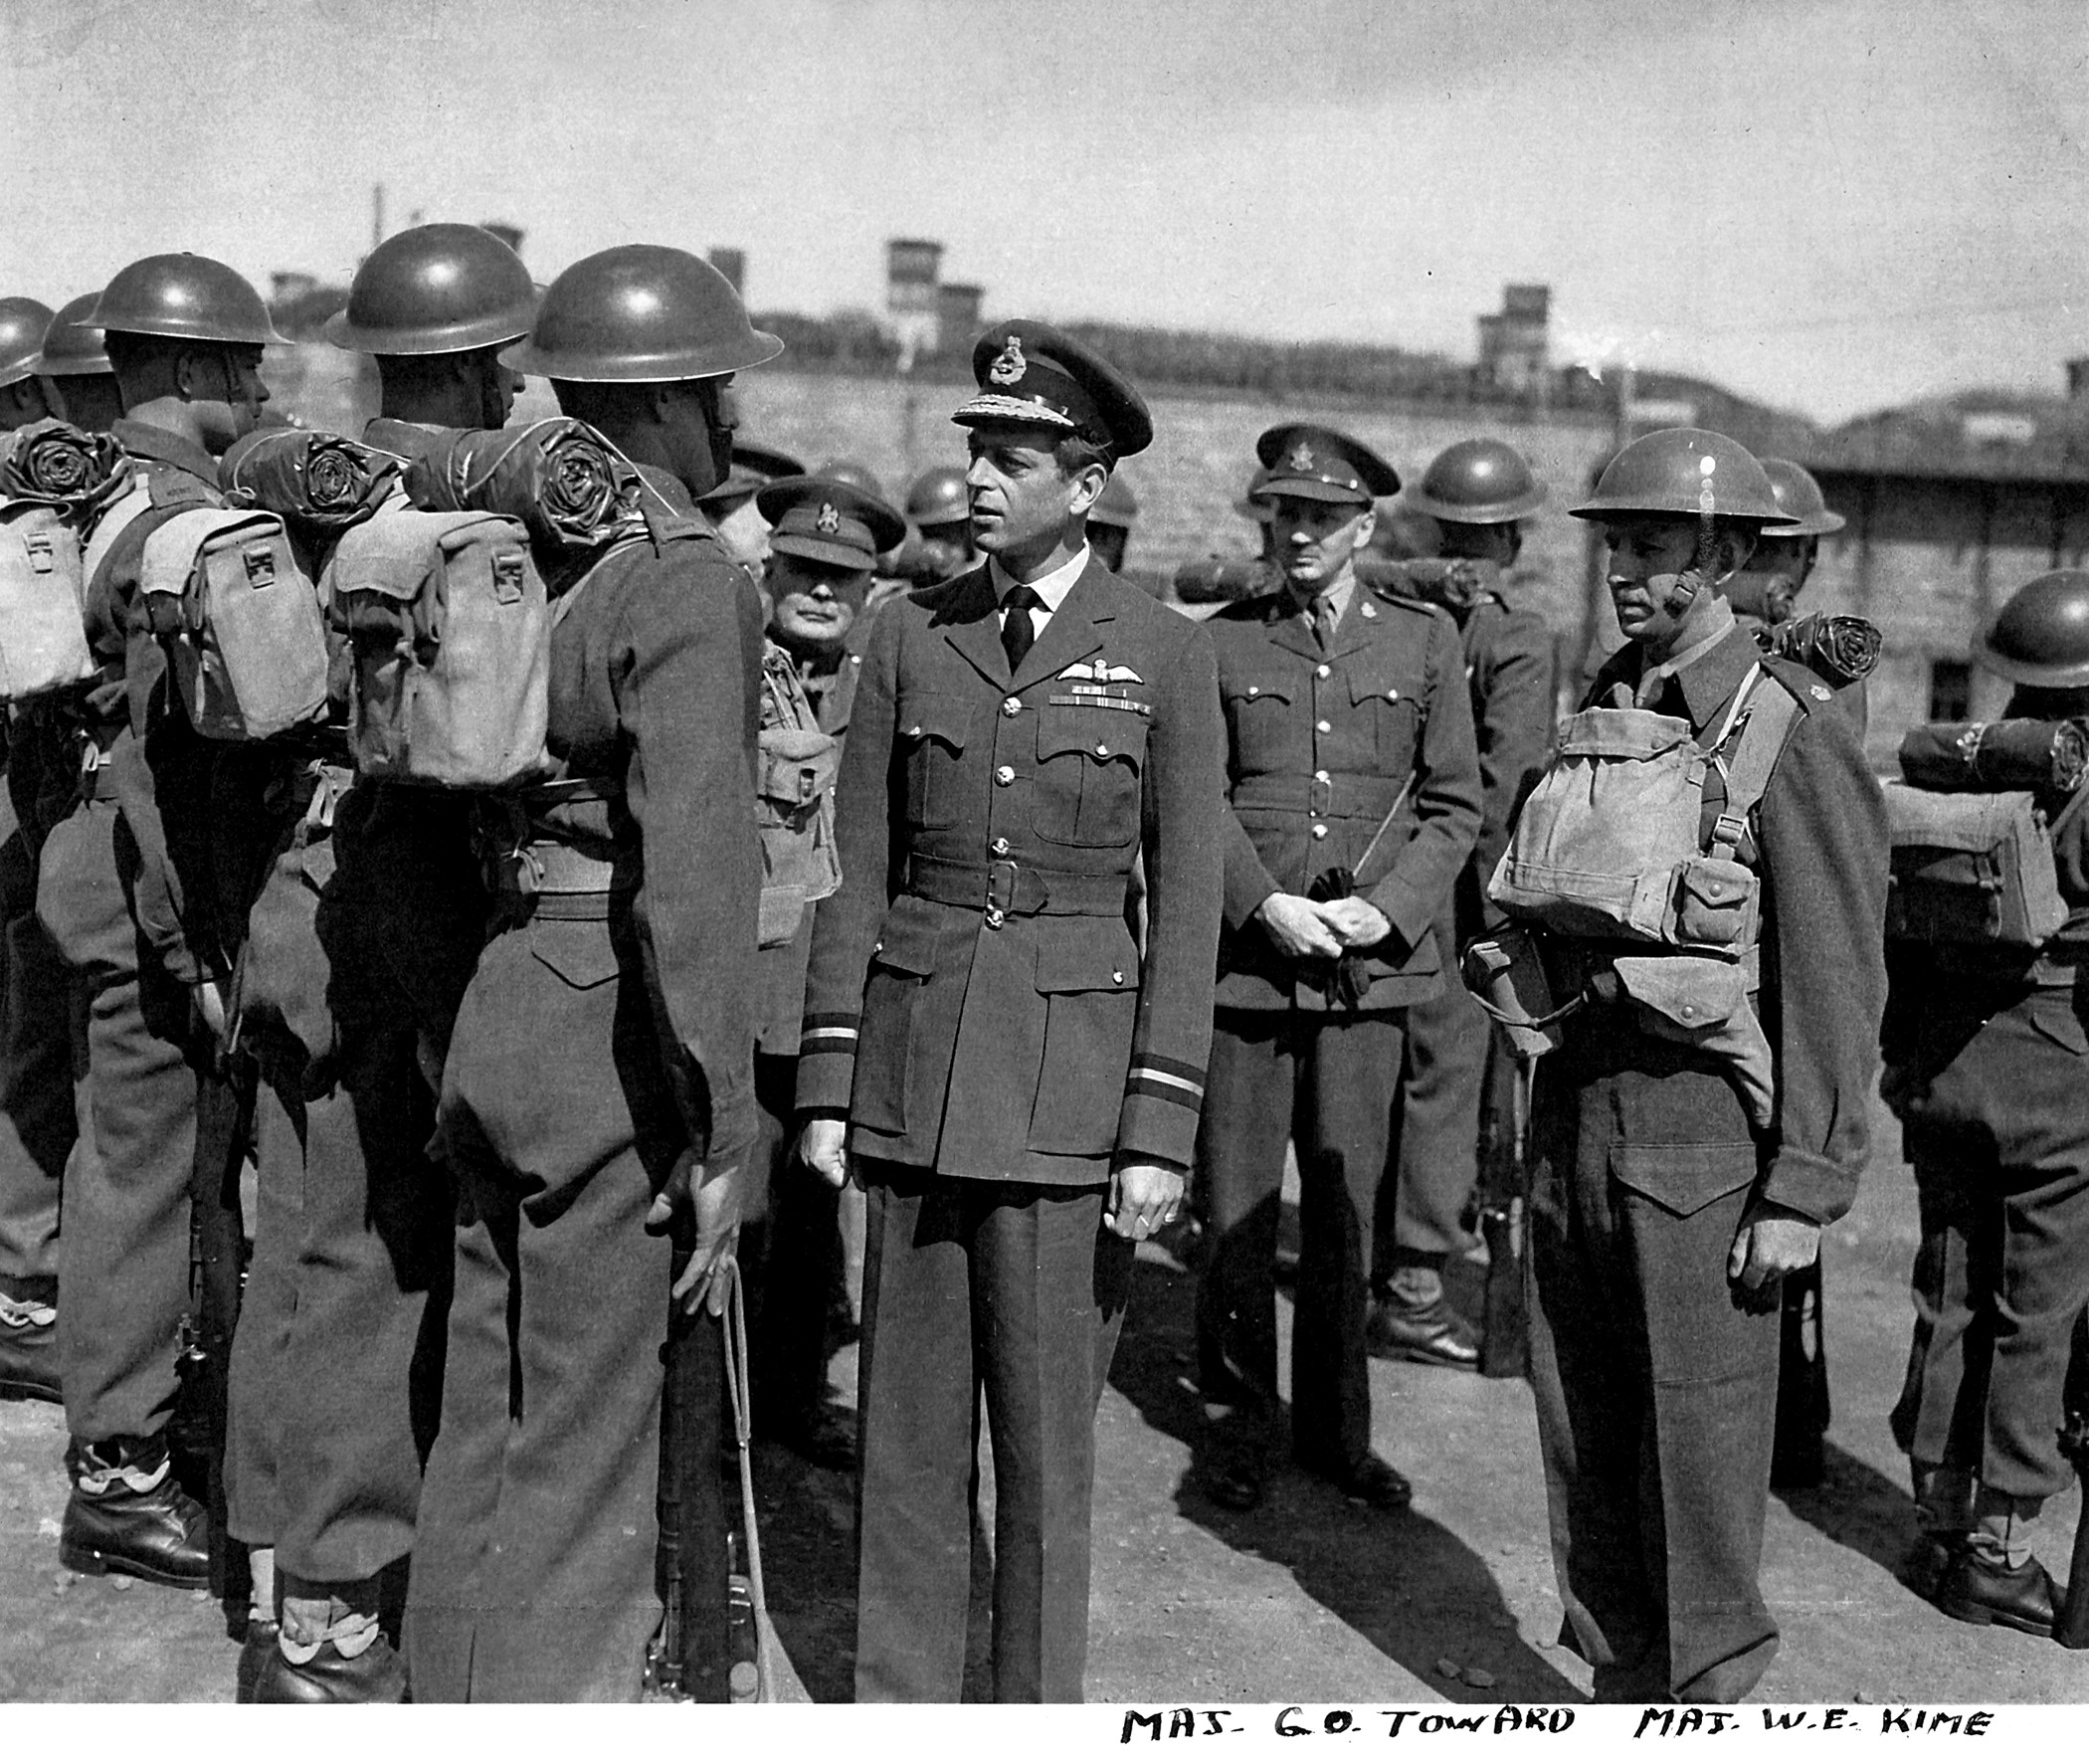 The Duke of Kent, Colonel-in-Chief inspects 1st Battalion The Kent Regiment in Halifax in 1941.